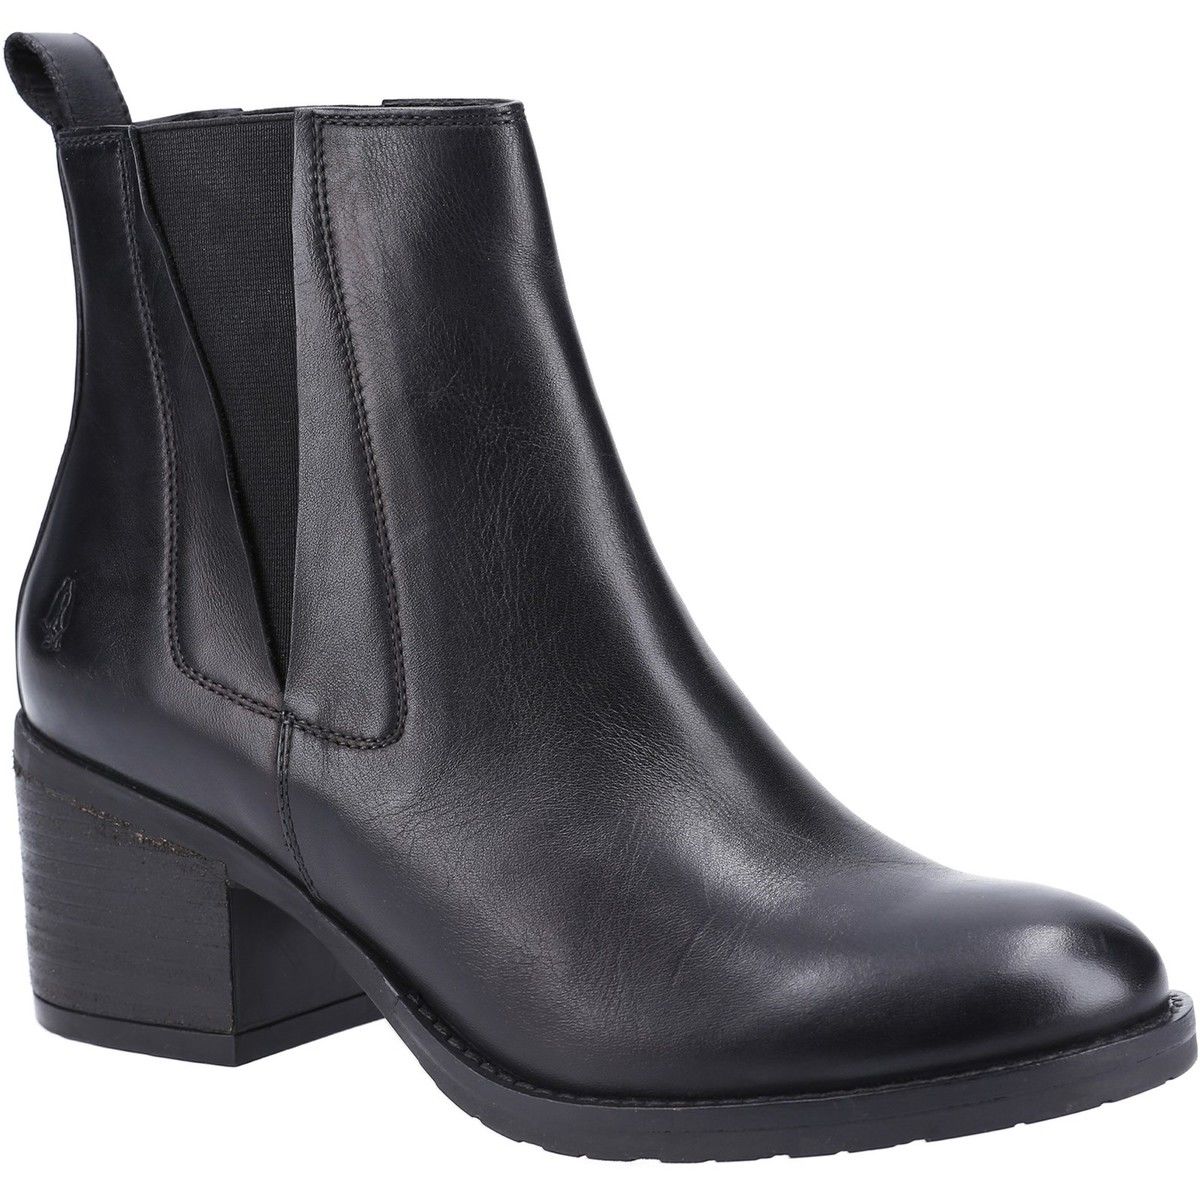 Hush Puppies Hermione Black Womens ankle boots HPW1000-239-1 in a Plain Leather in Size 3